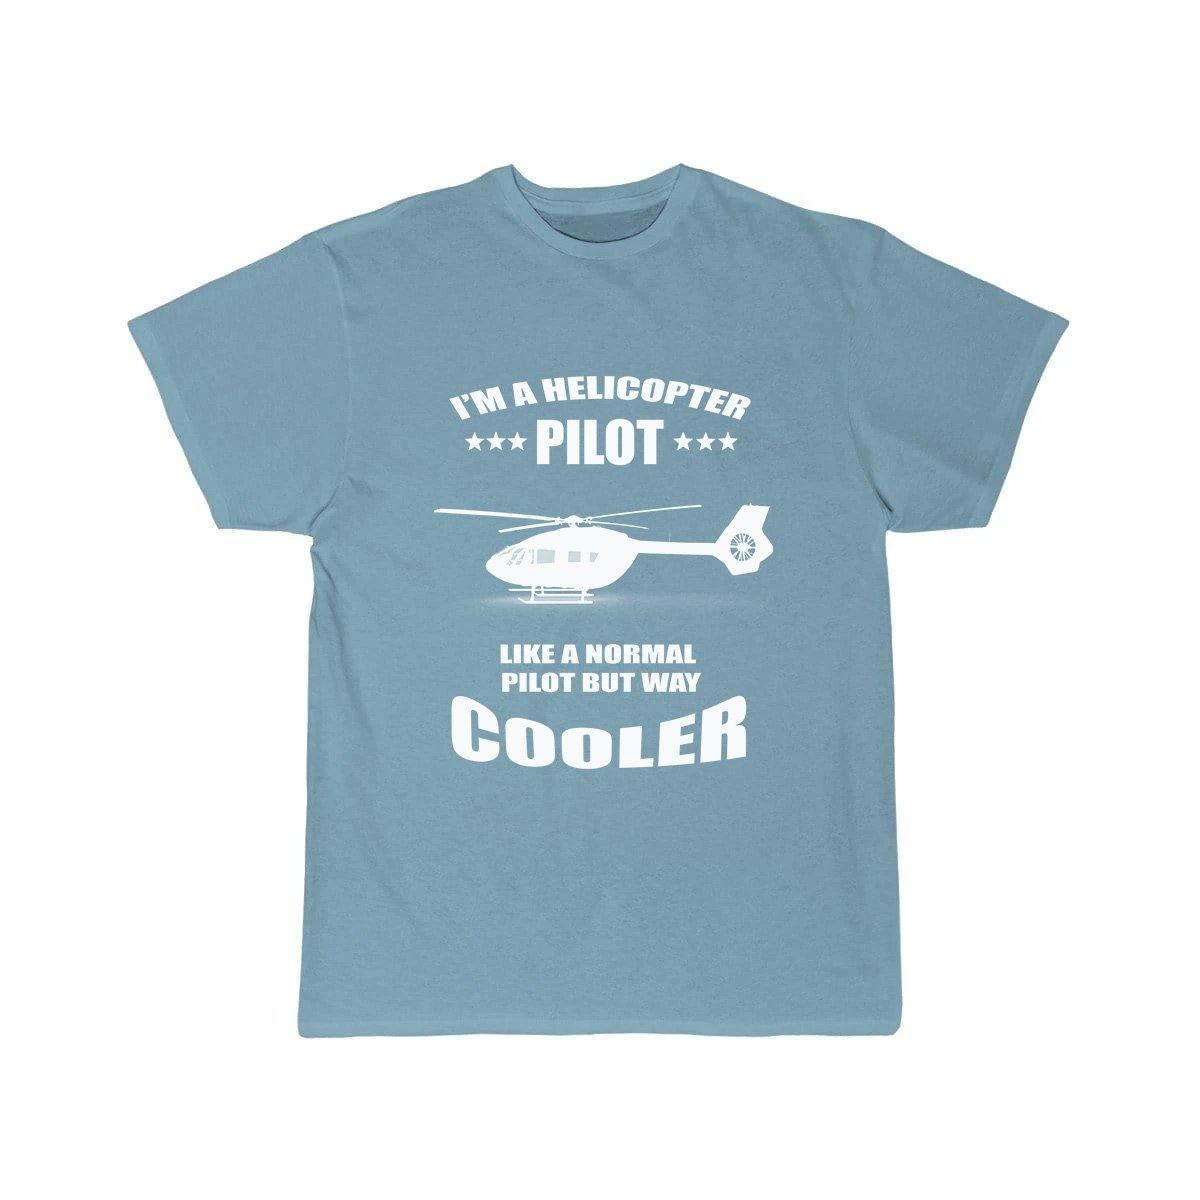 I'M A PILOT IRBUS HELICOPTER PILOT LIKE AIRBUS NORMAL PILOT BUT WAY COOLER T SHIRT THE AV8R